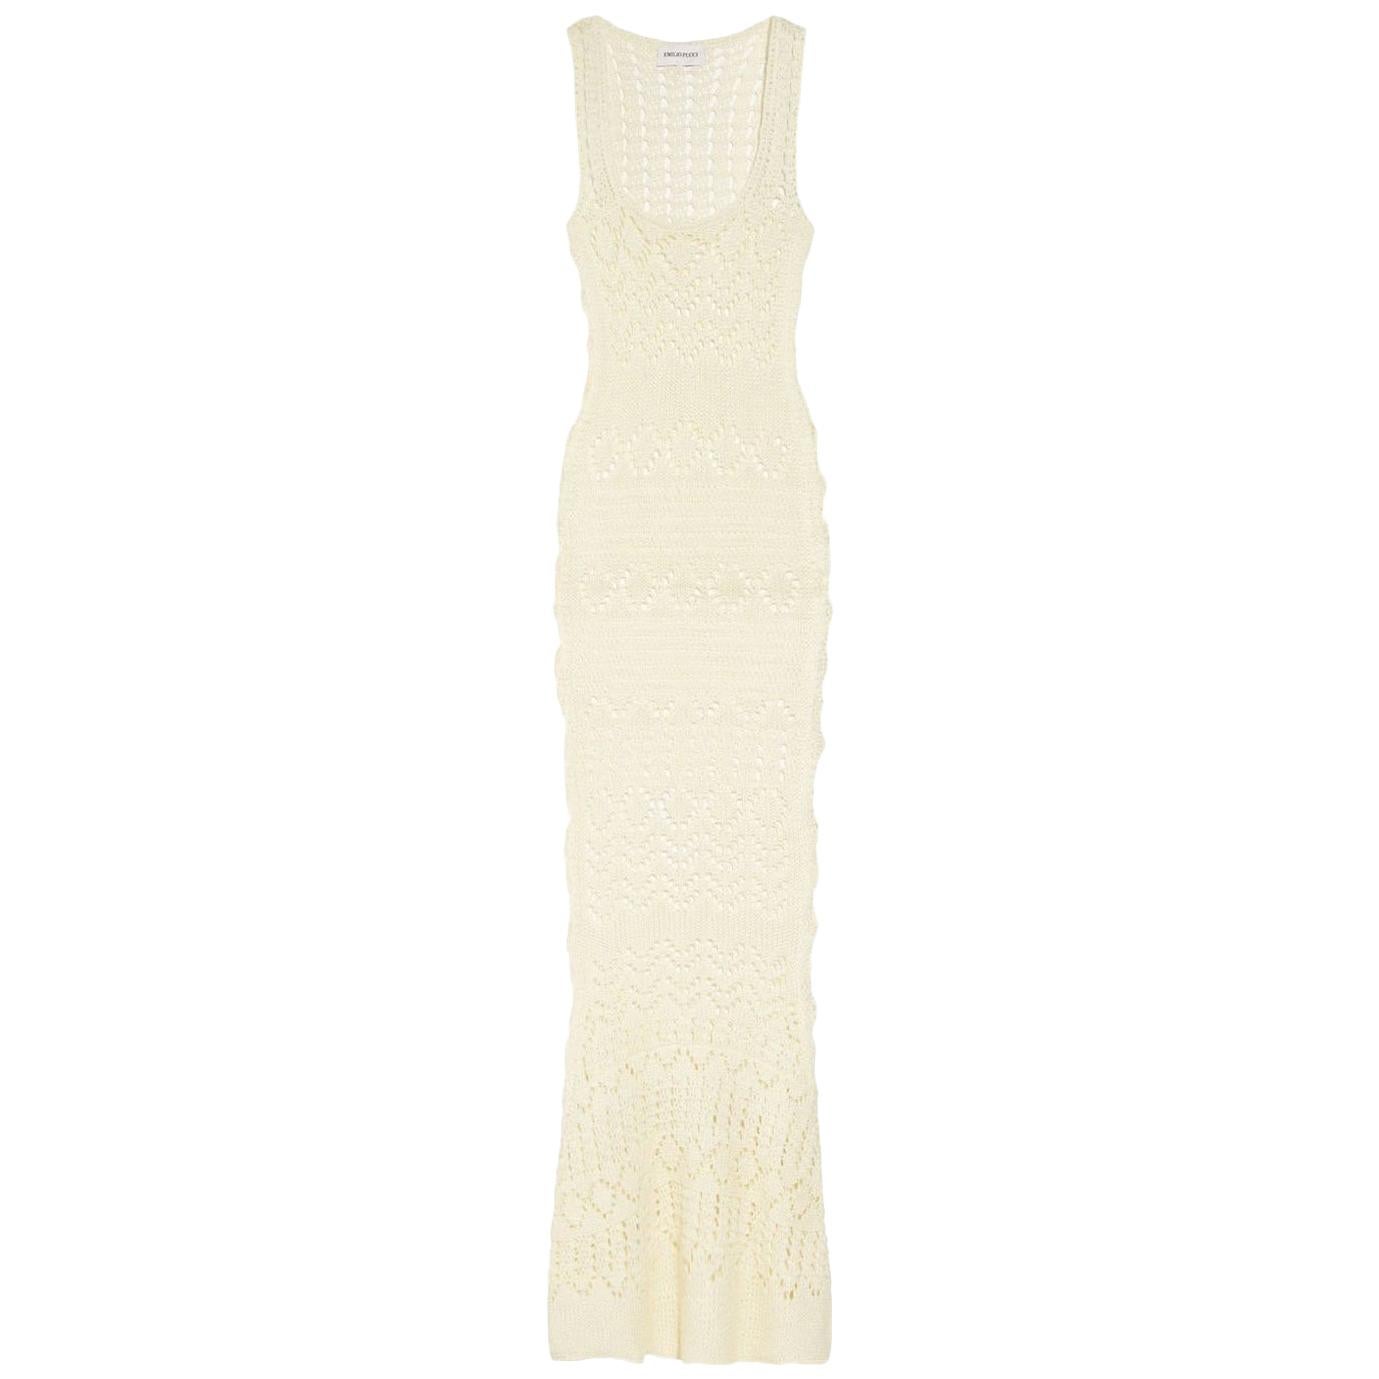 NEW Emilio Pucci by Peter Dundas Studded Ivory Crochet Knit Maxi Dress Gown